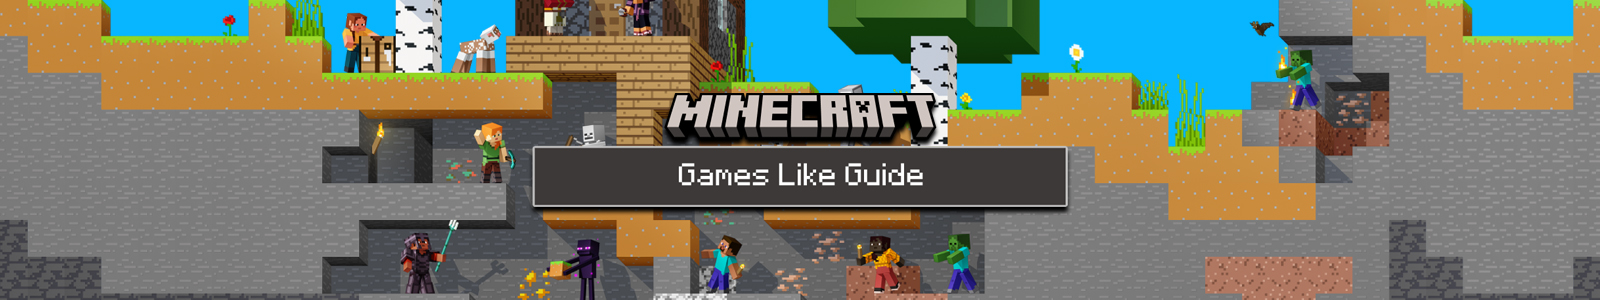 Minecraft games like guide